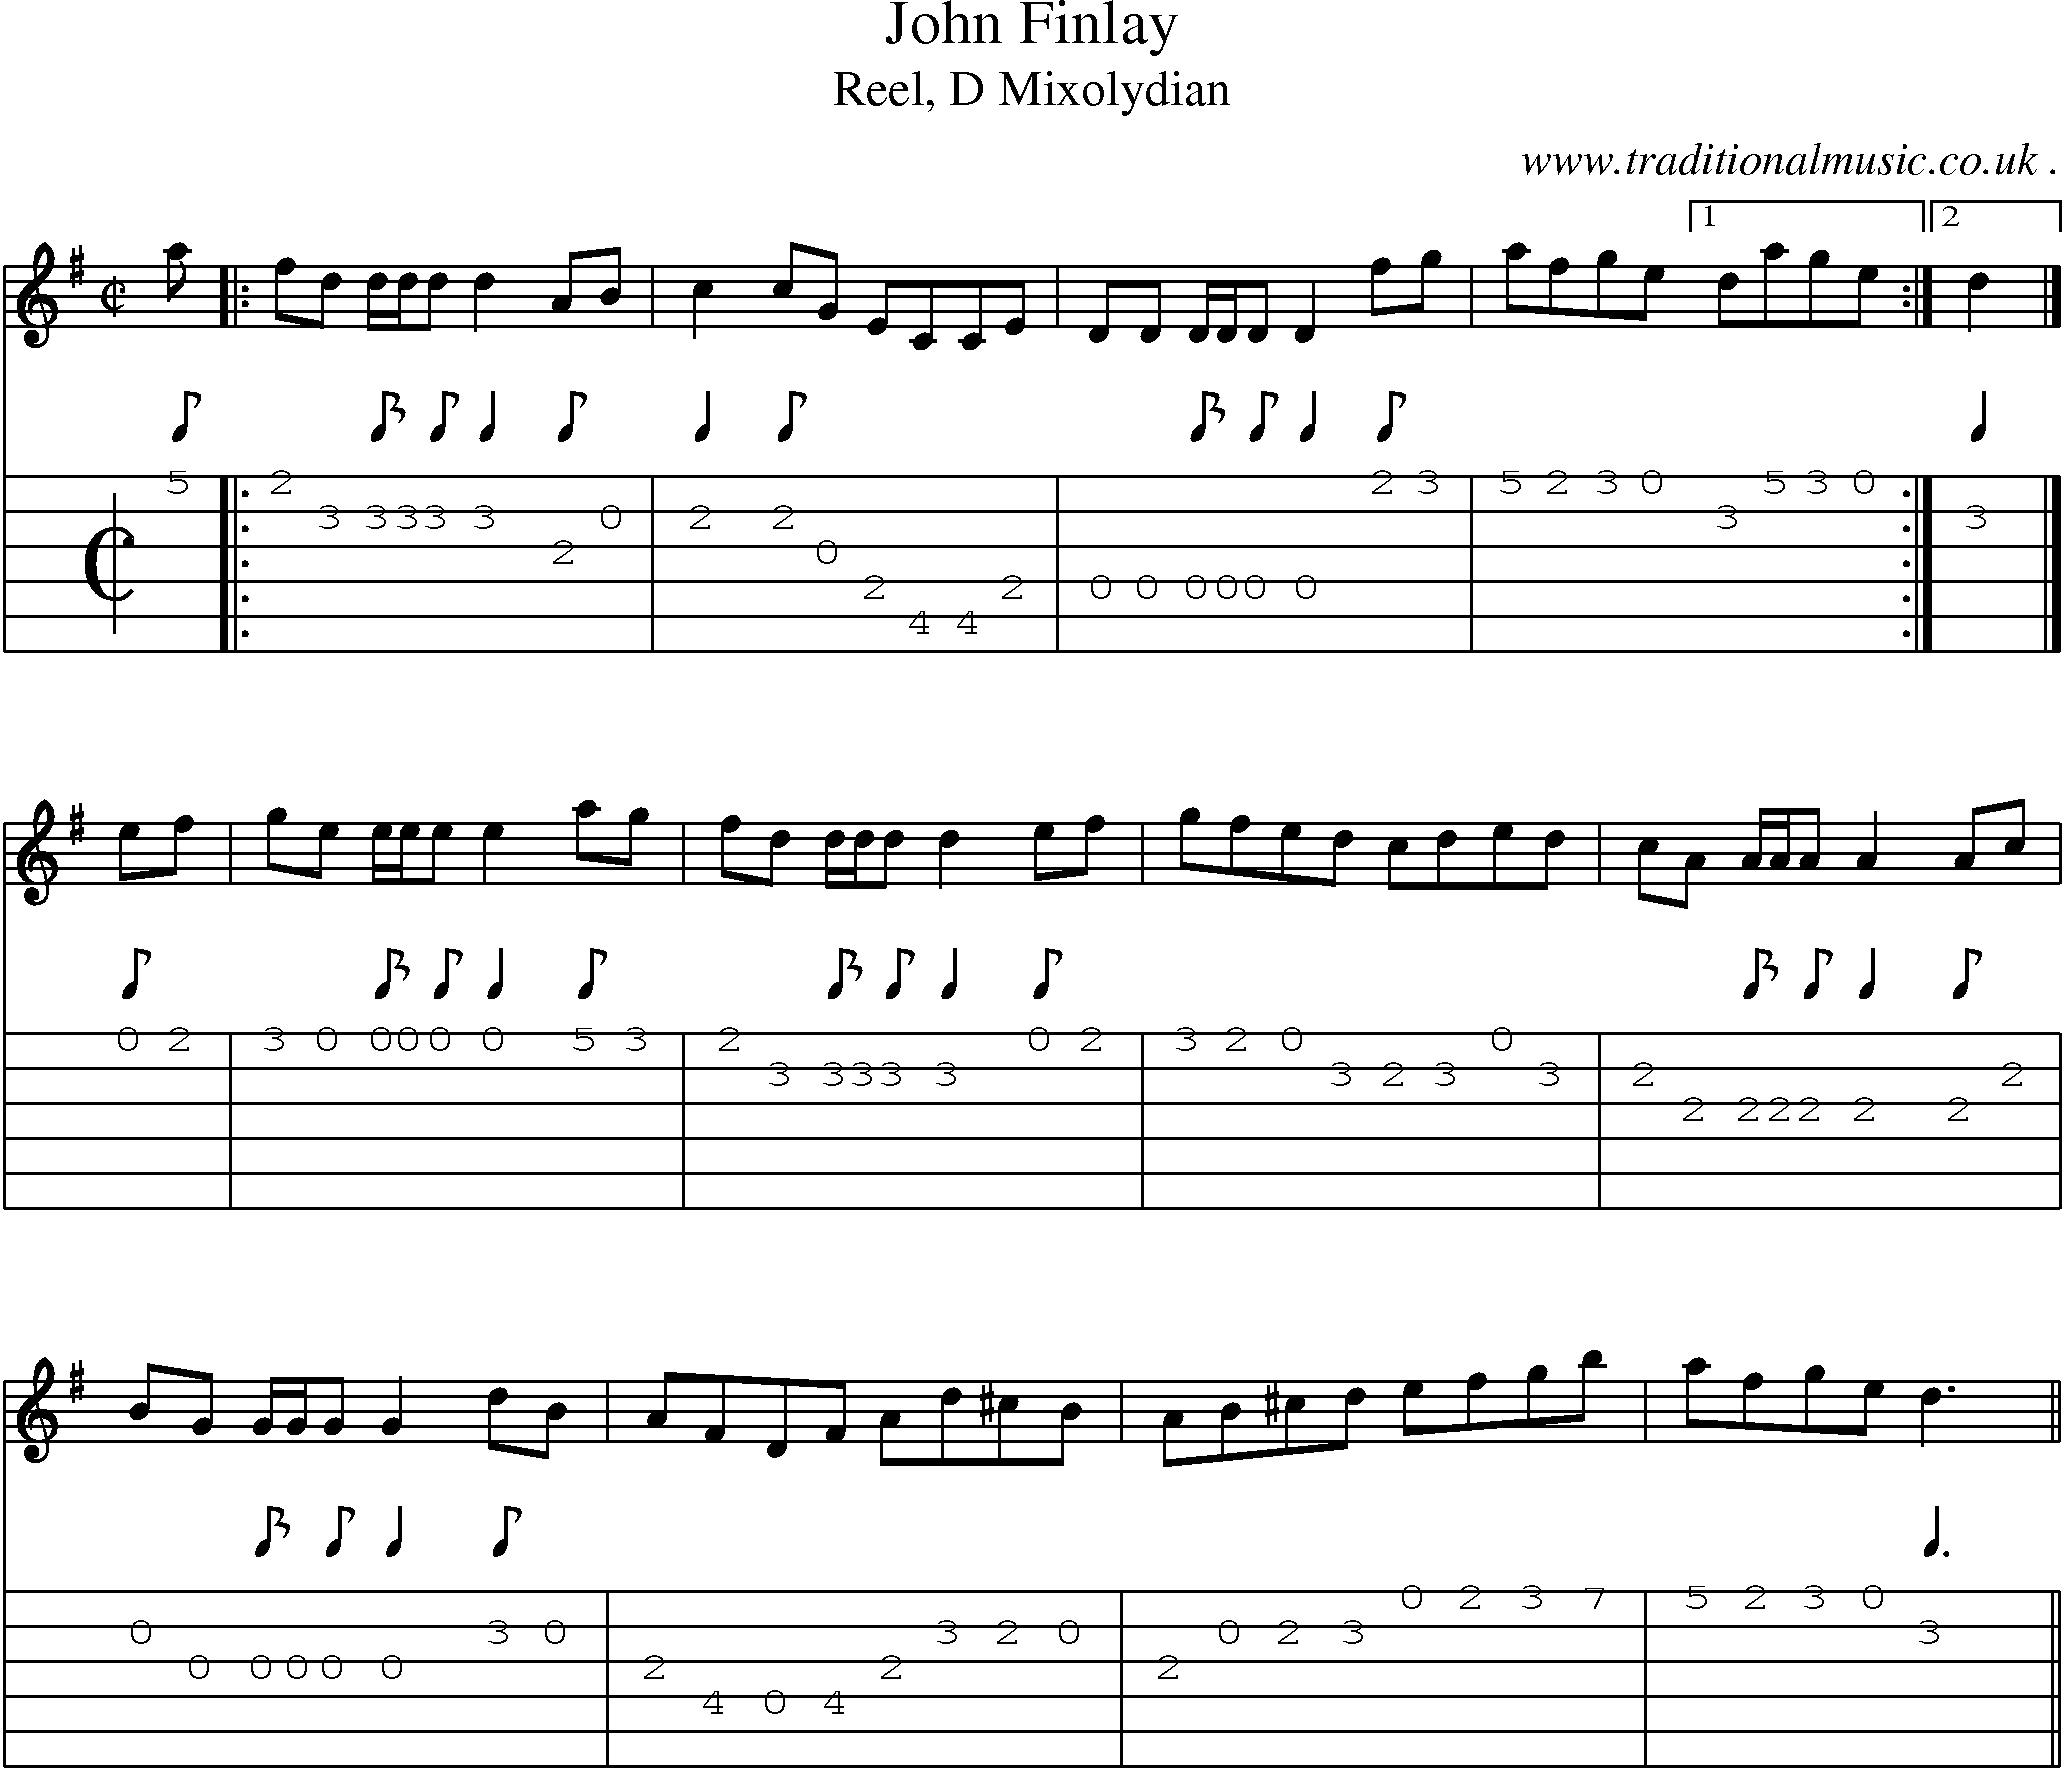 Sheet-music  score, Chords and Guitar Tabs for John Finlay